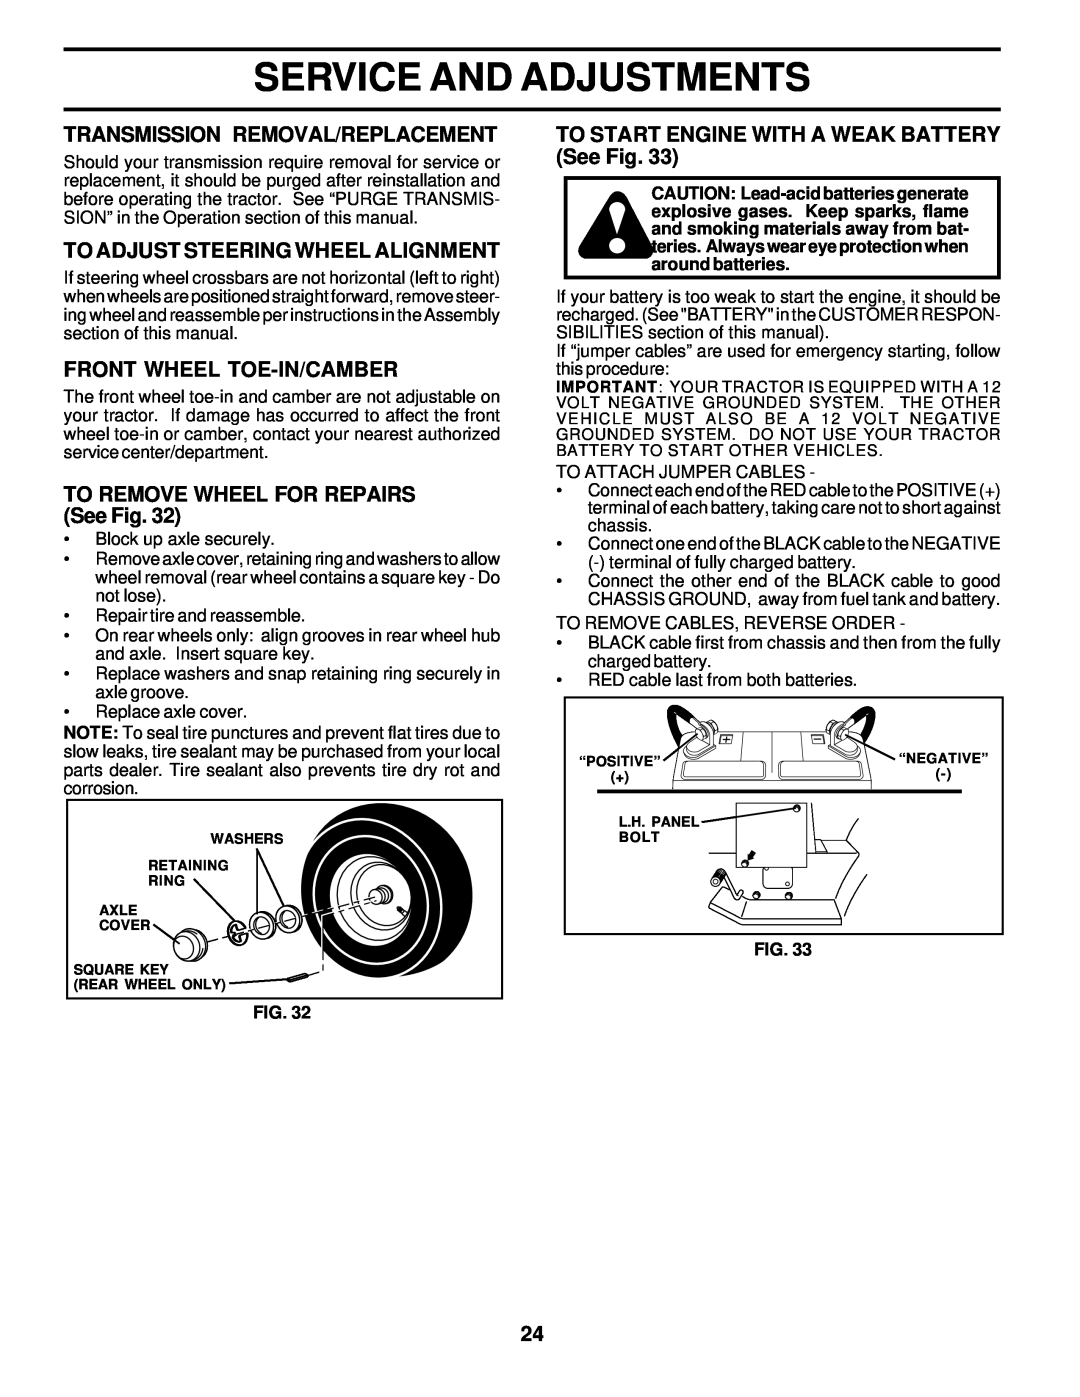 Poulan 178249 owner manual Transmission Removal/Replacement, To Adjust Steering Wheel Alignment, Front Wheel Toe-In/Camber 